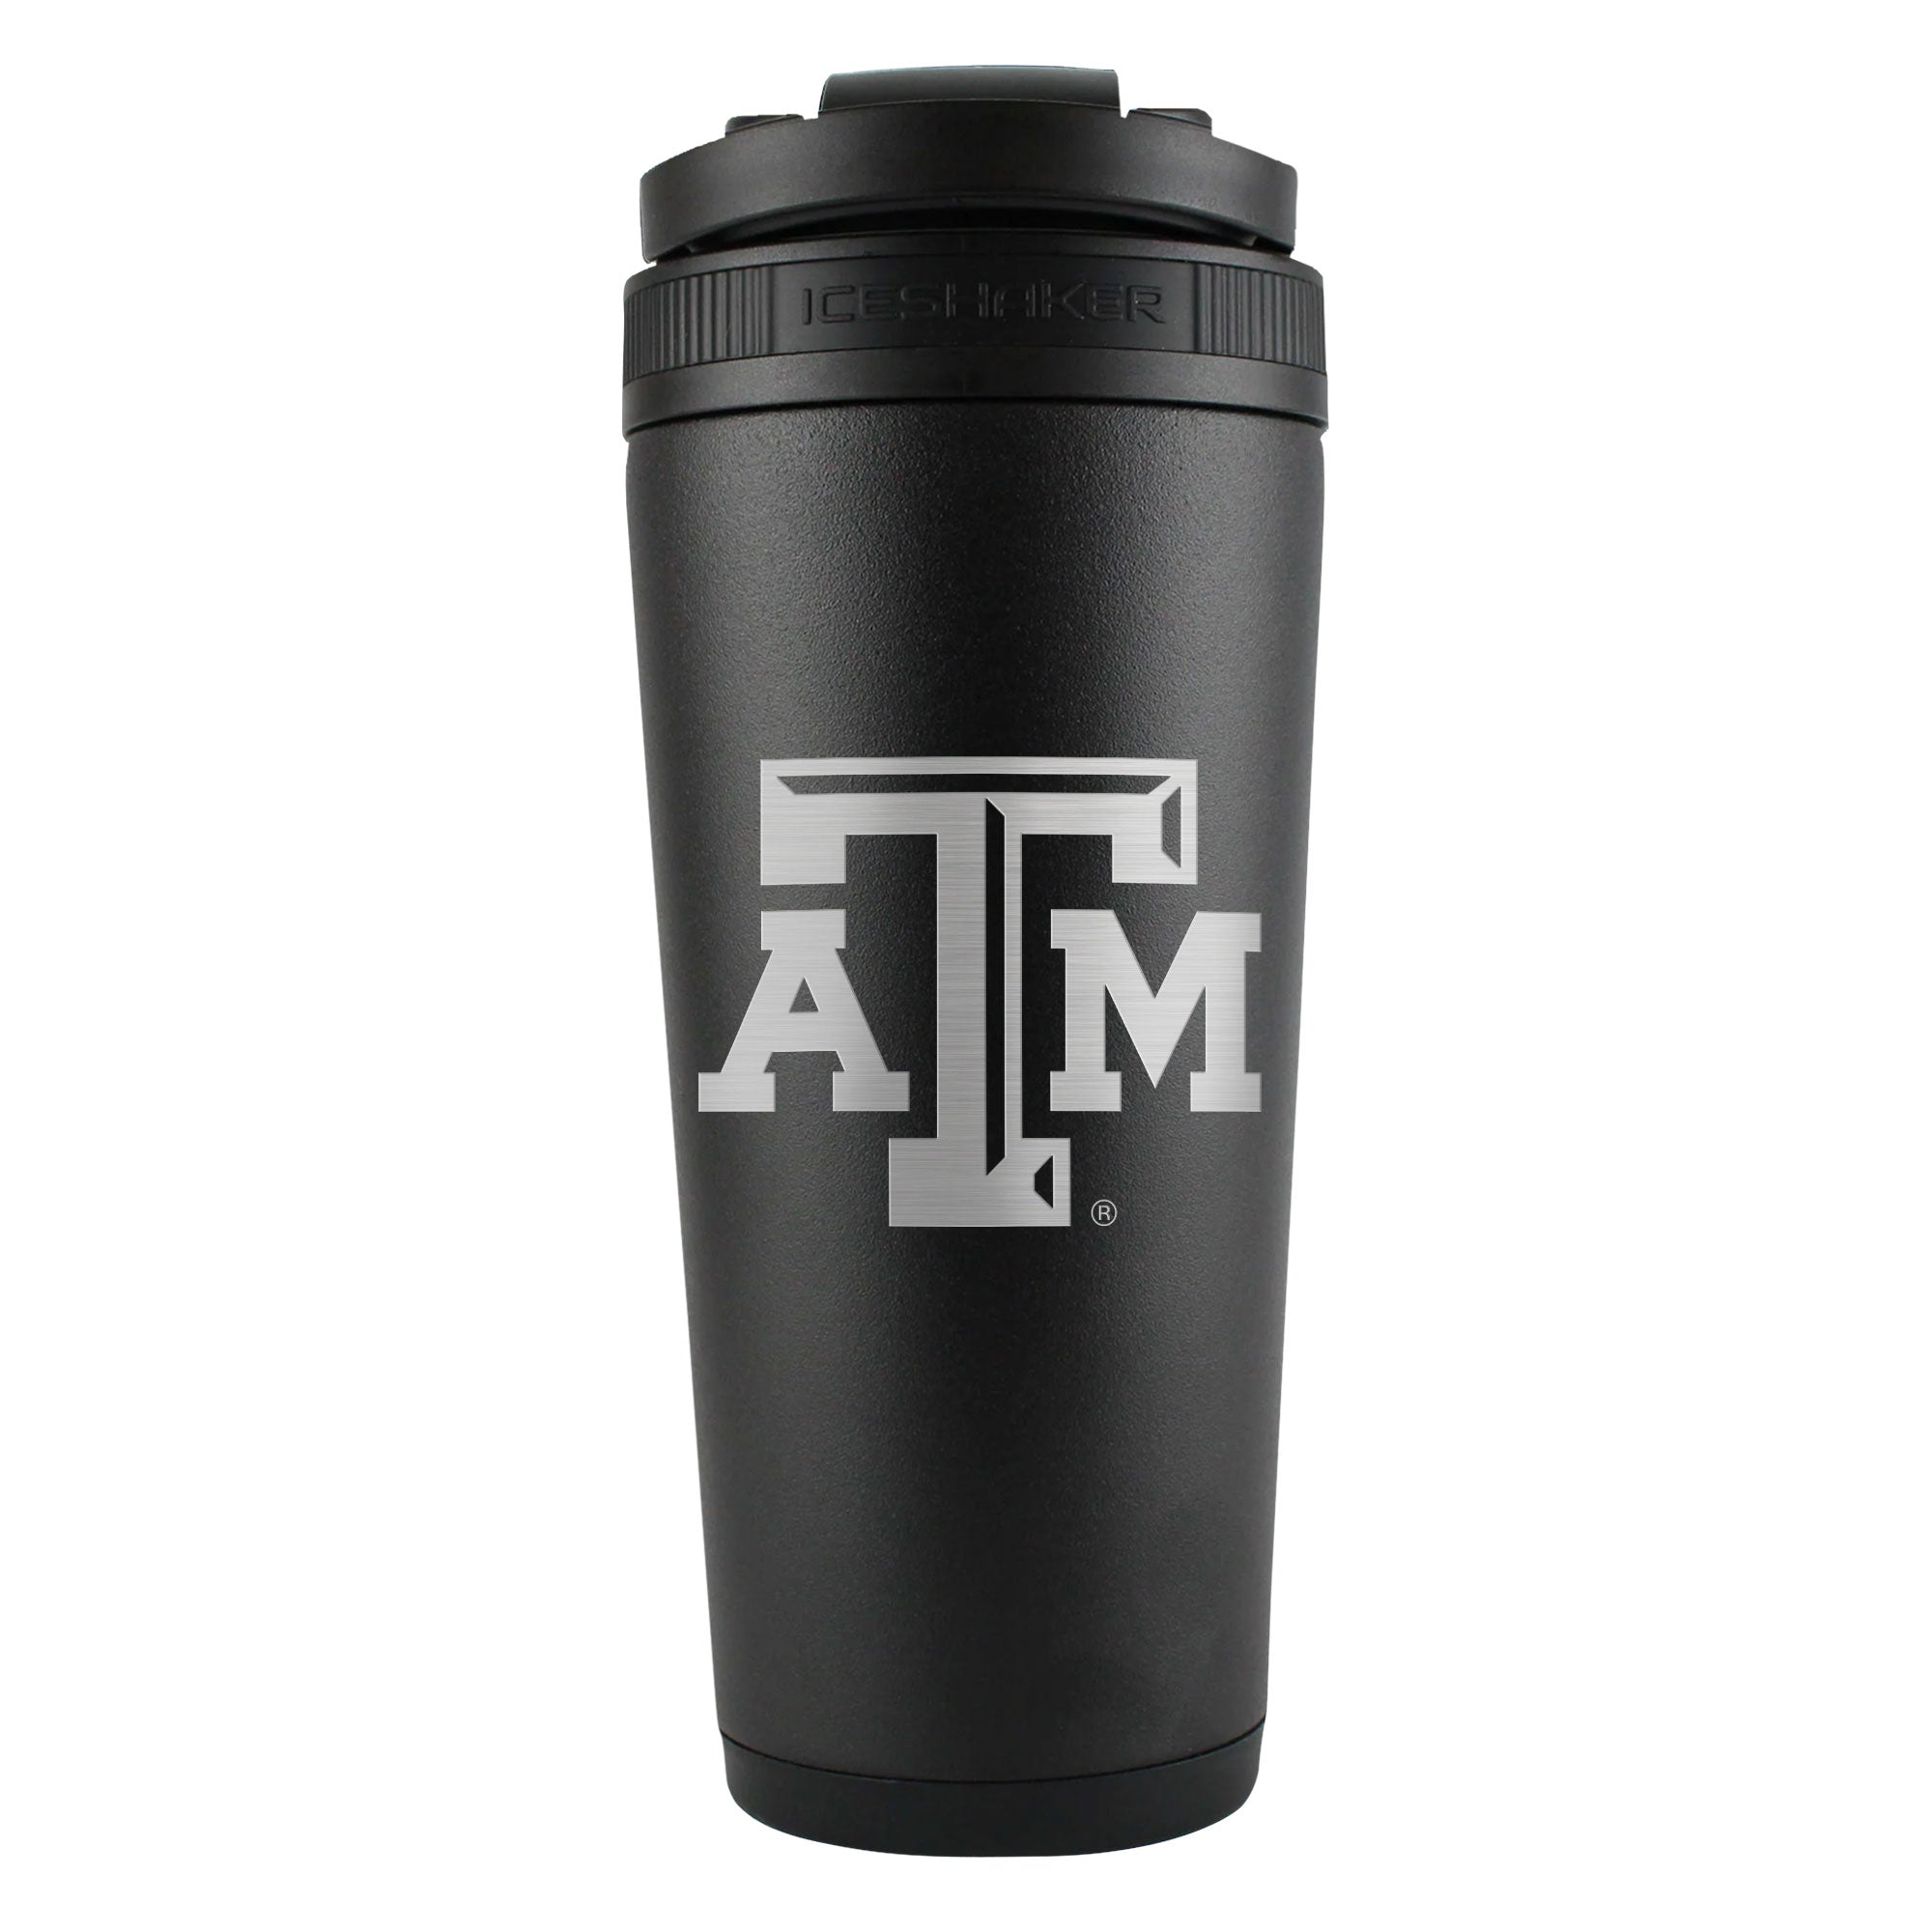 Officially Licensed Texas A&M University 26oz Ice Shaker